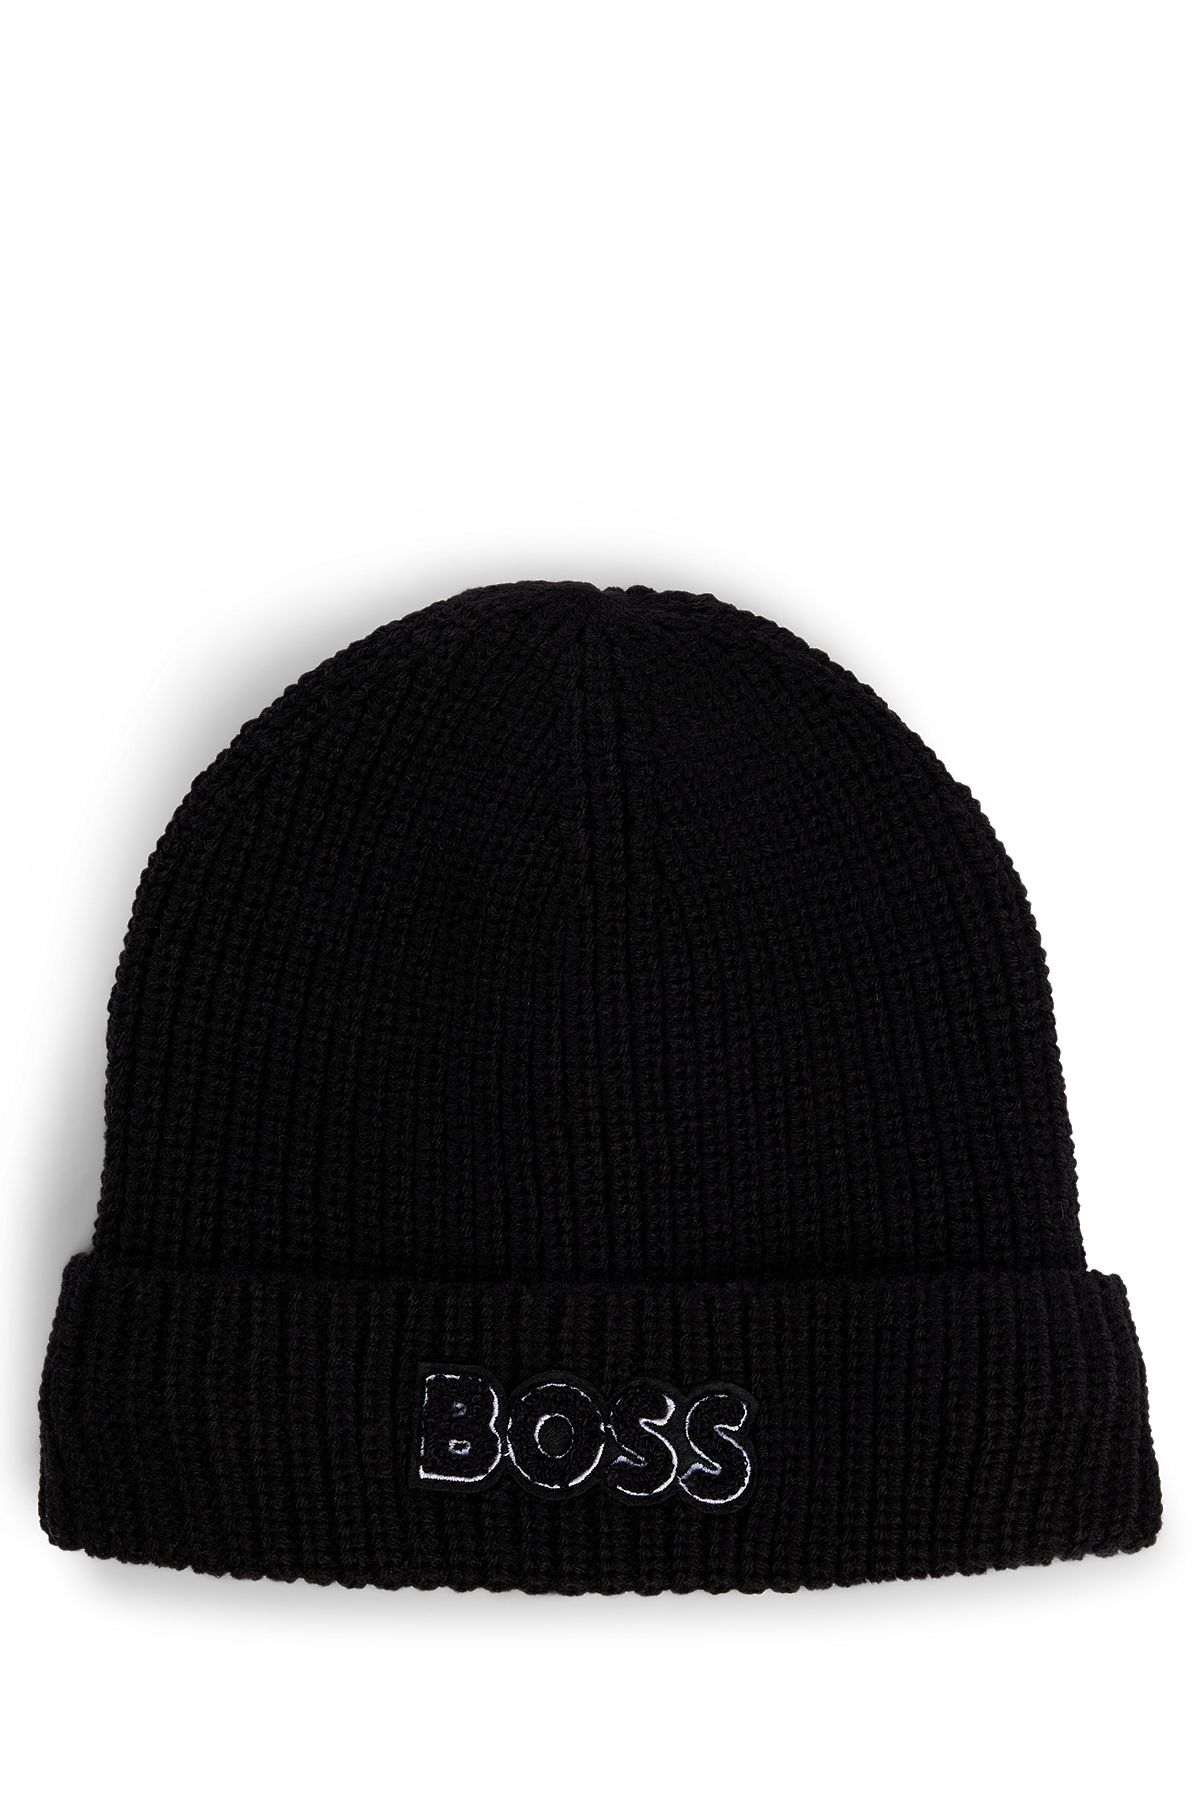 Kids' beanie hat with pompom and jacquard-woven logo, Black